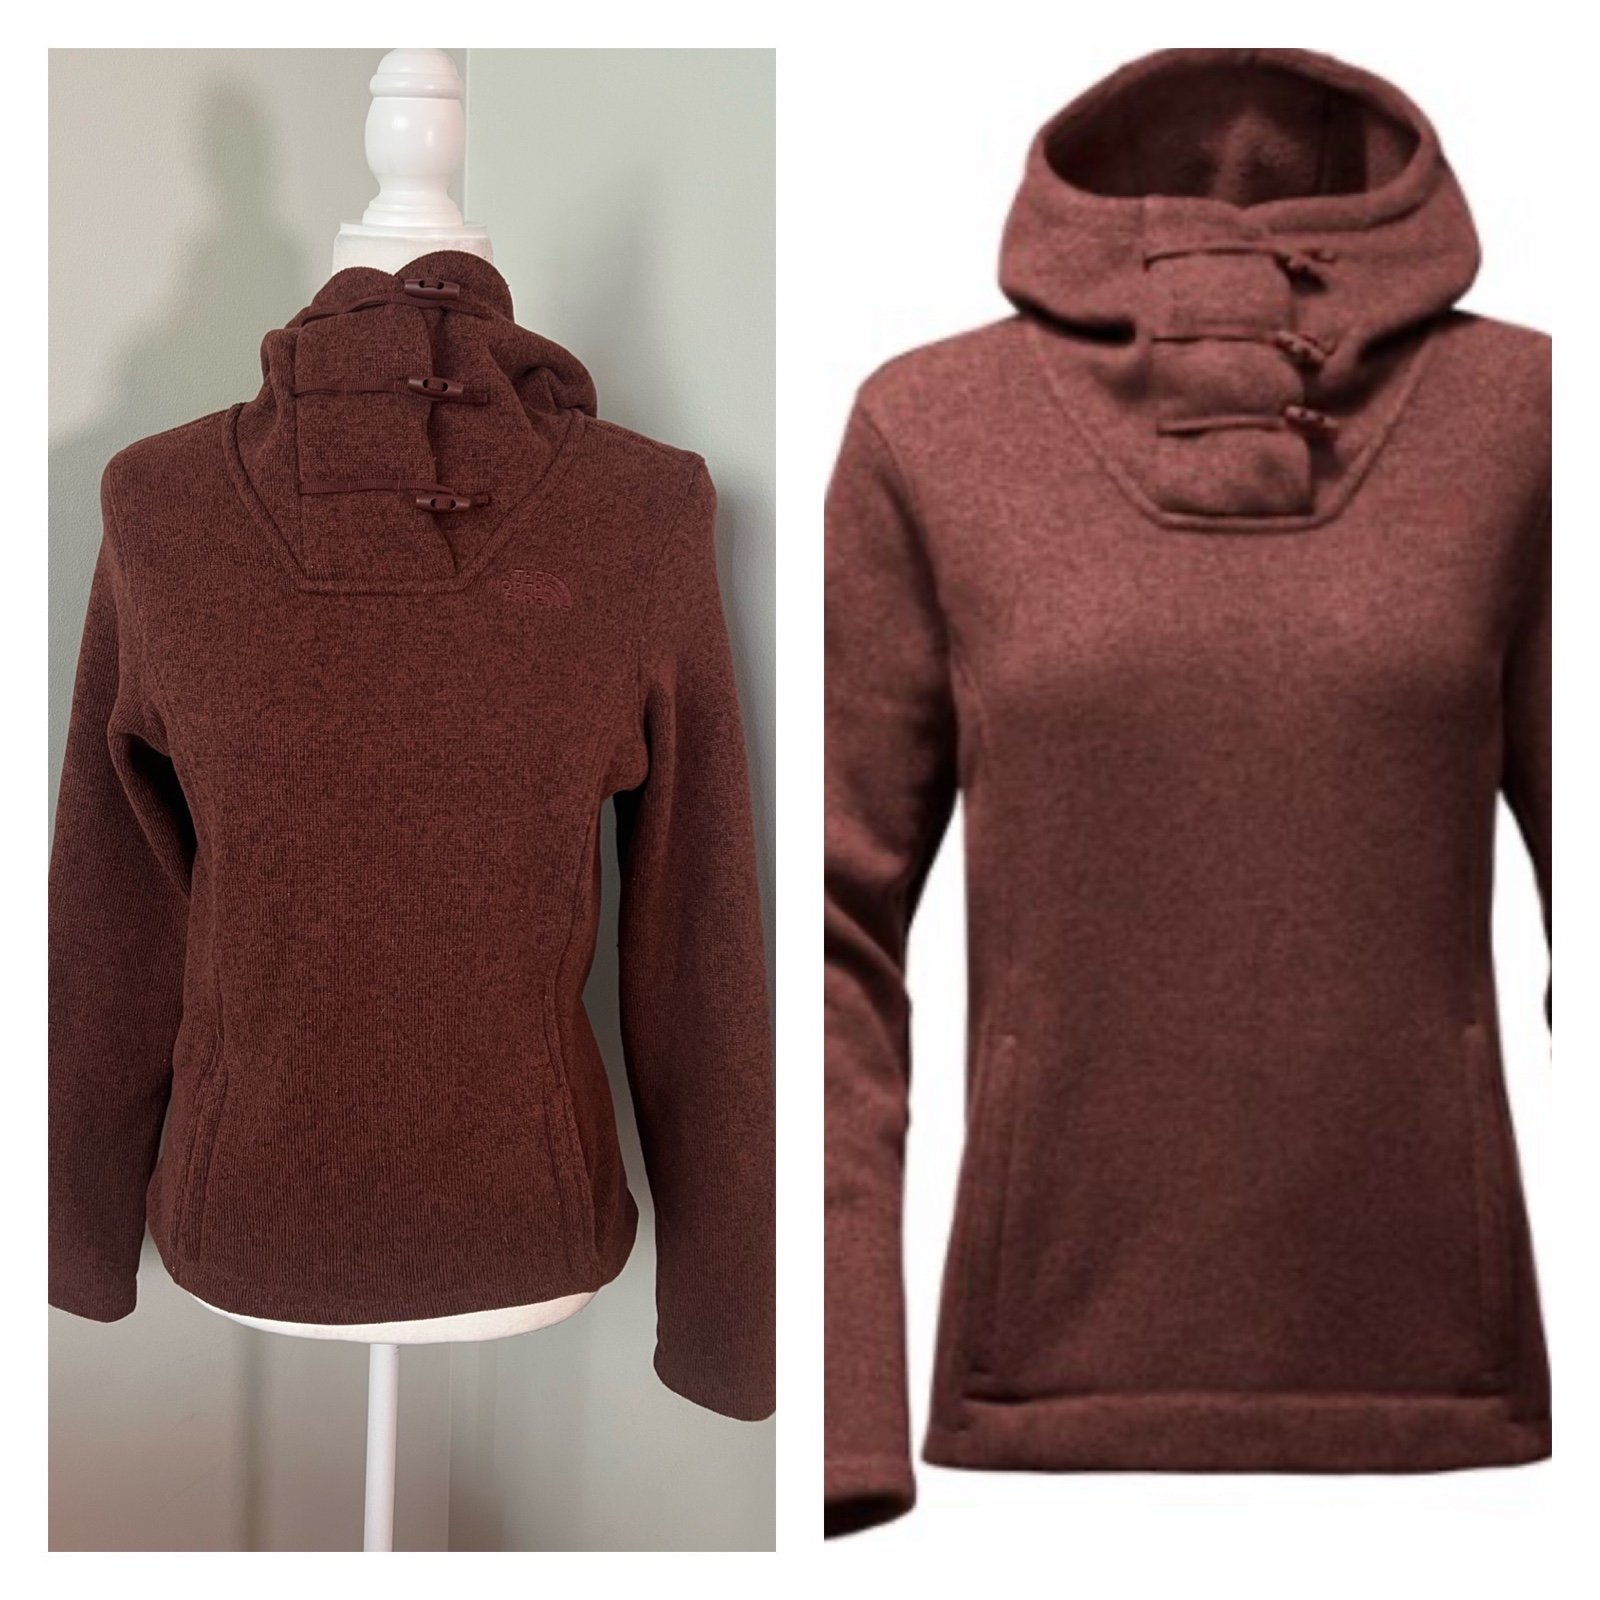 High quality NORTH FACE Crescent Hoodie Burgundy Wine M